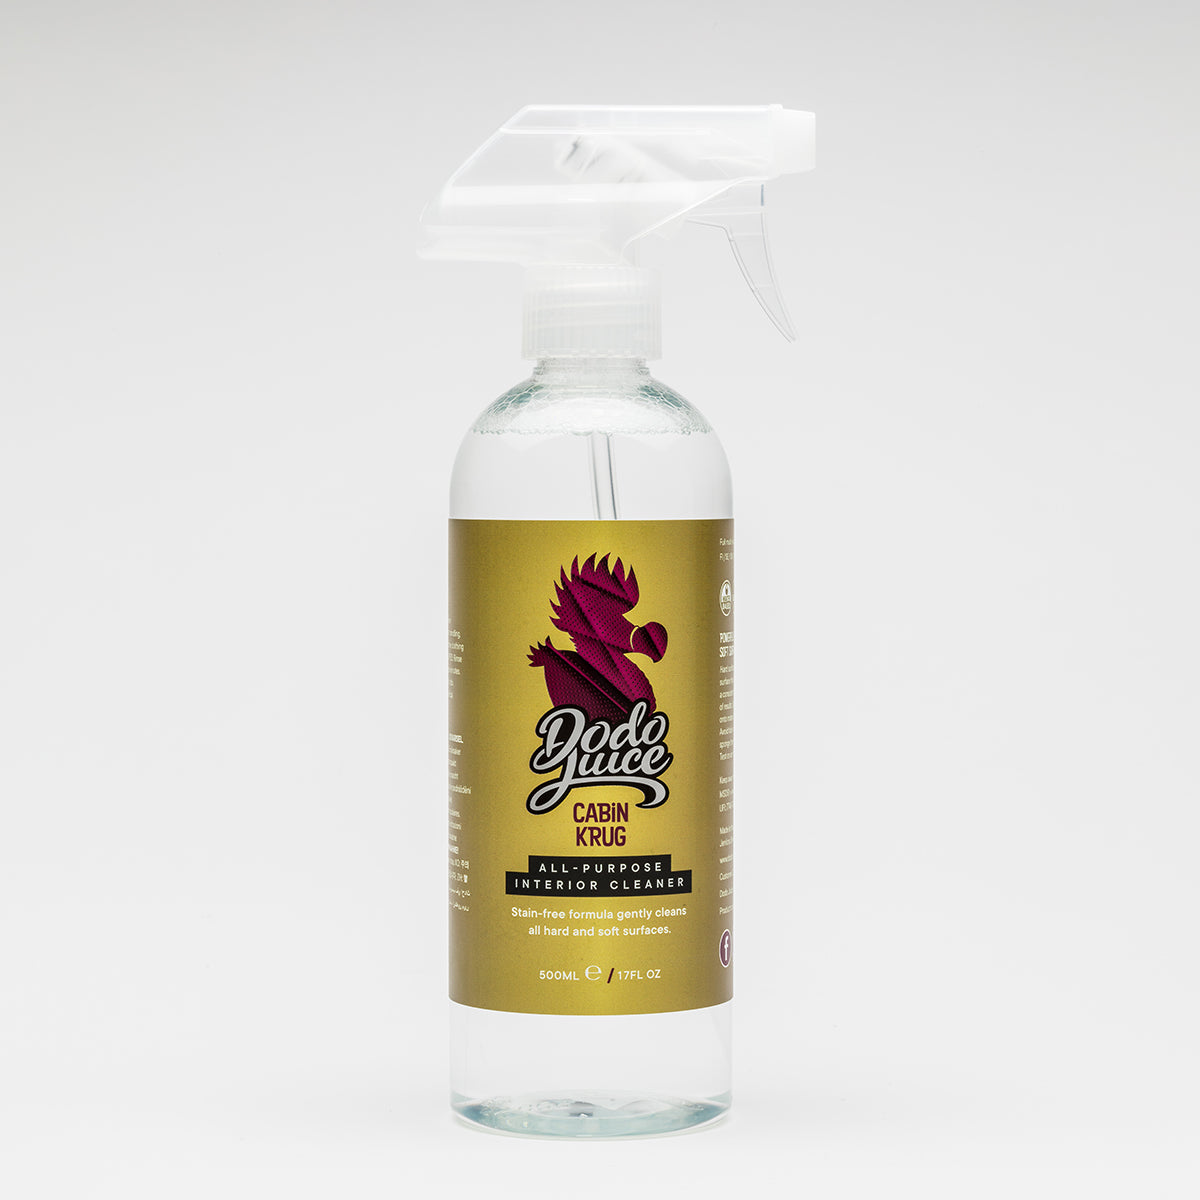 Cabin Krug 500ml - interior cleaning spray (hard and soft surfaces) HS 3405300000